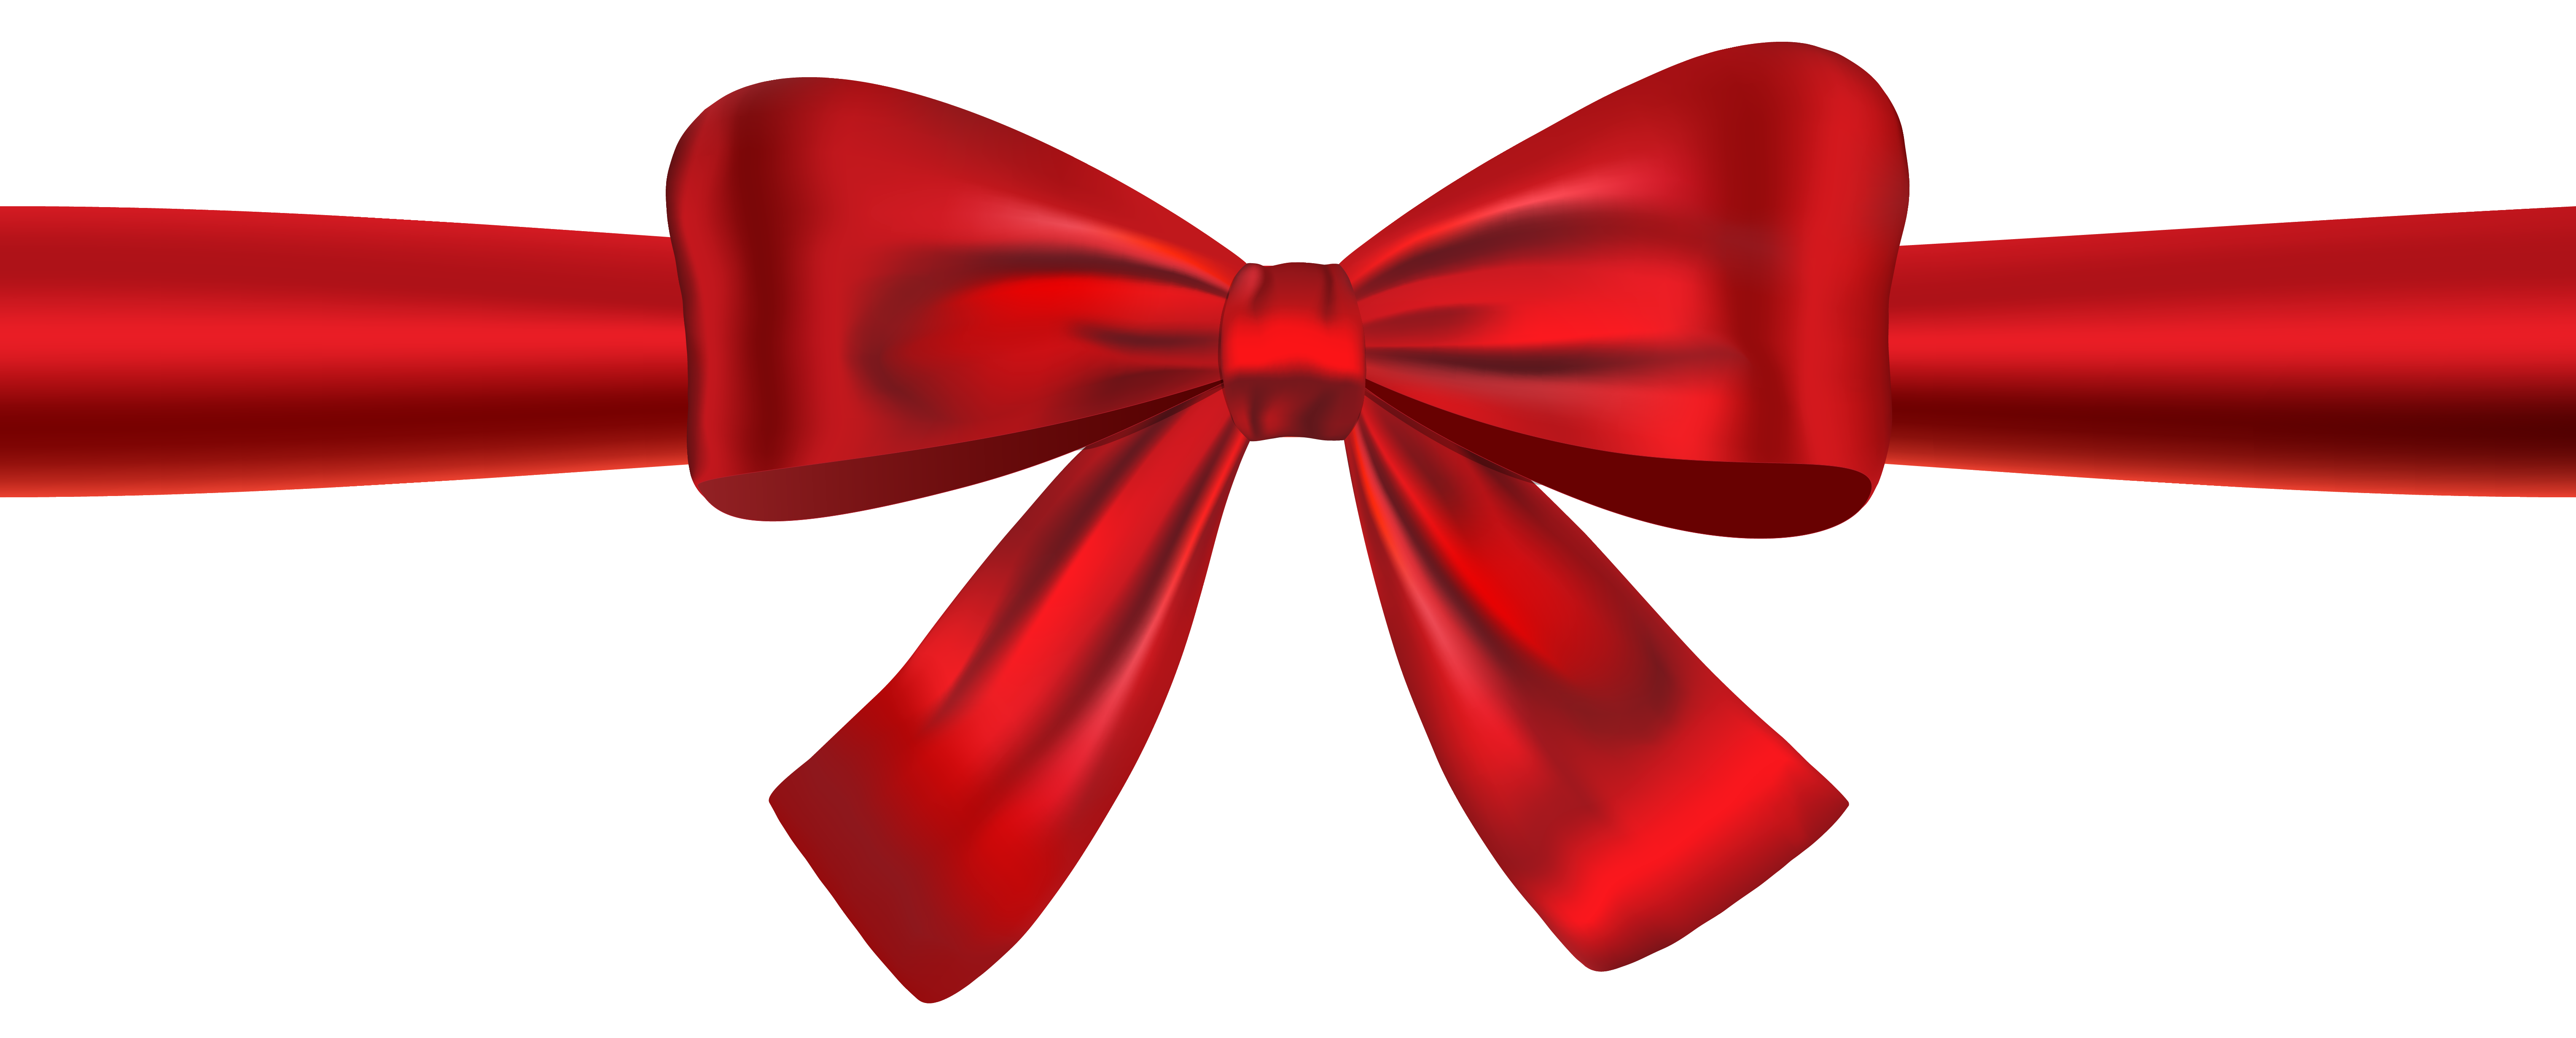 Red ribbon clipart free